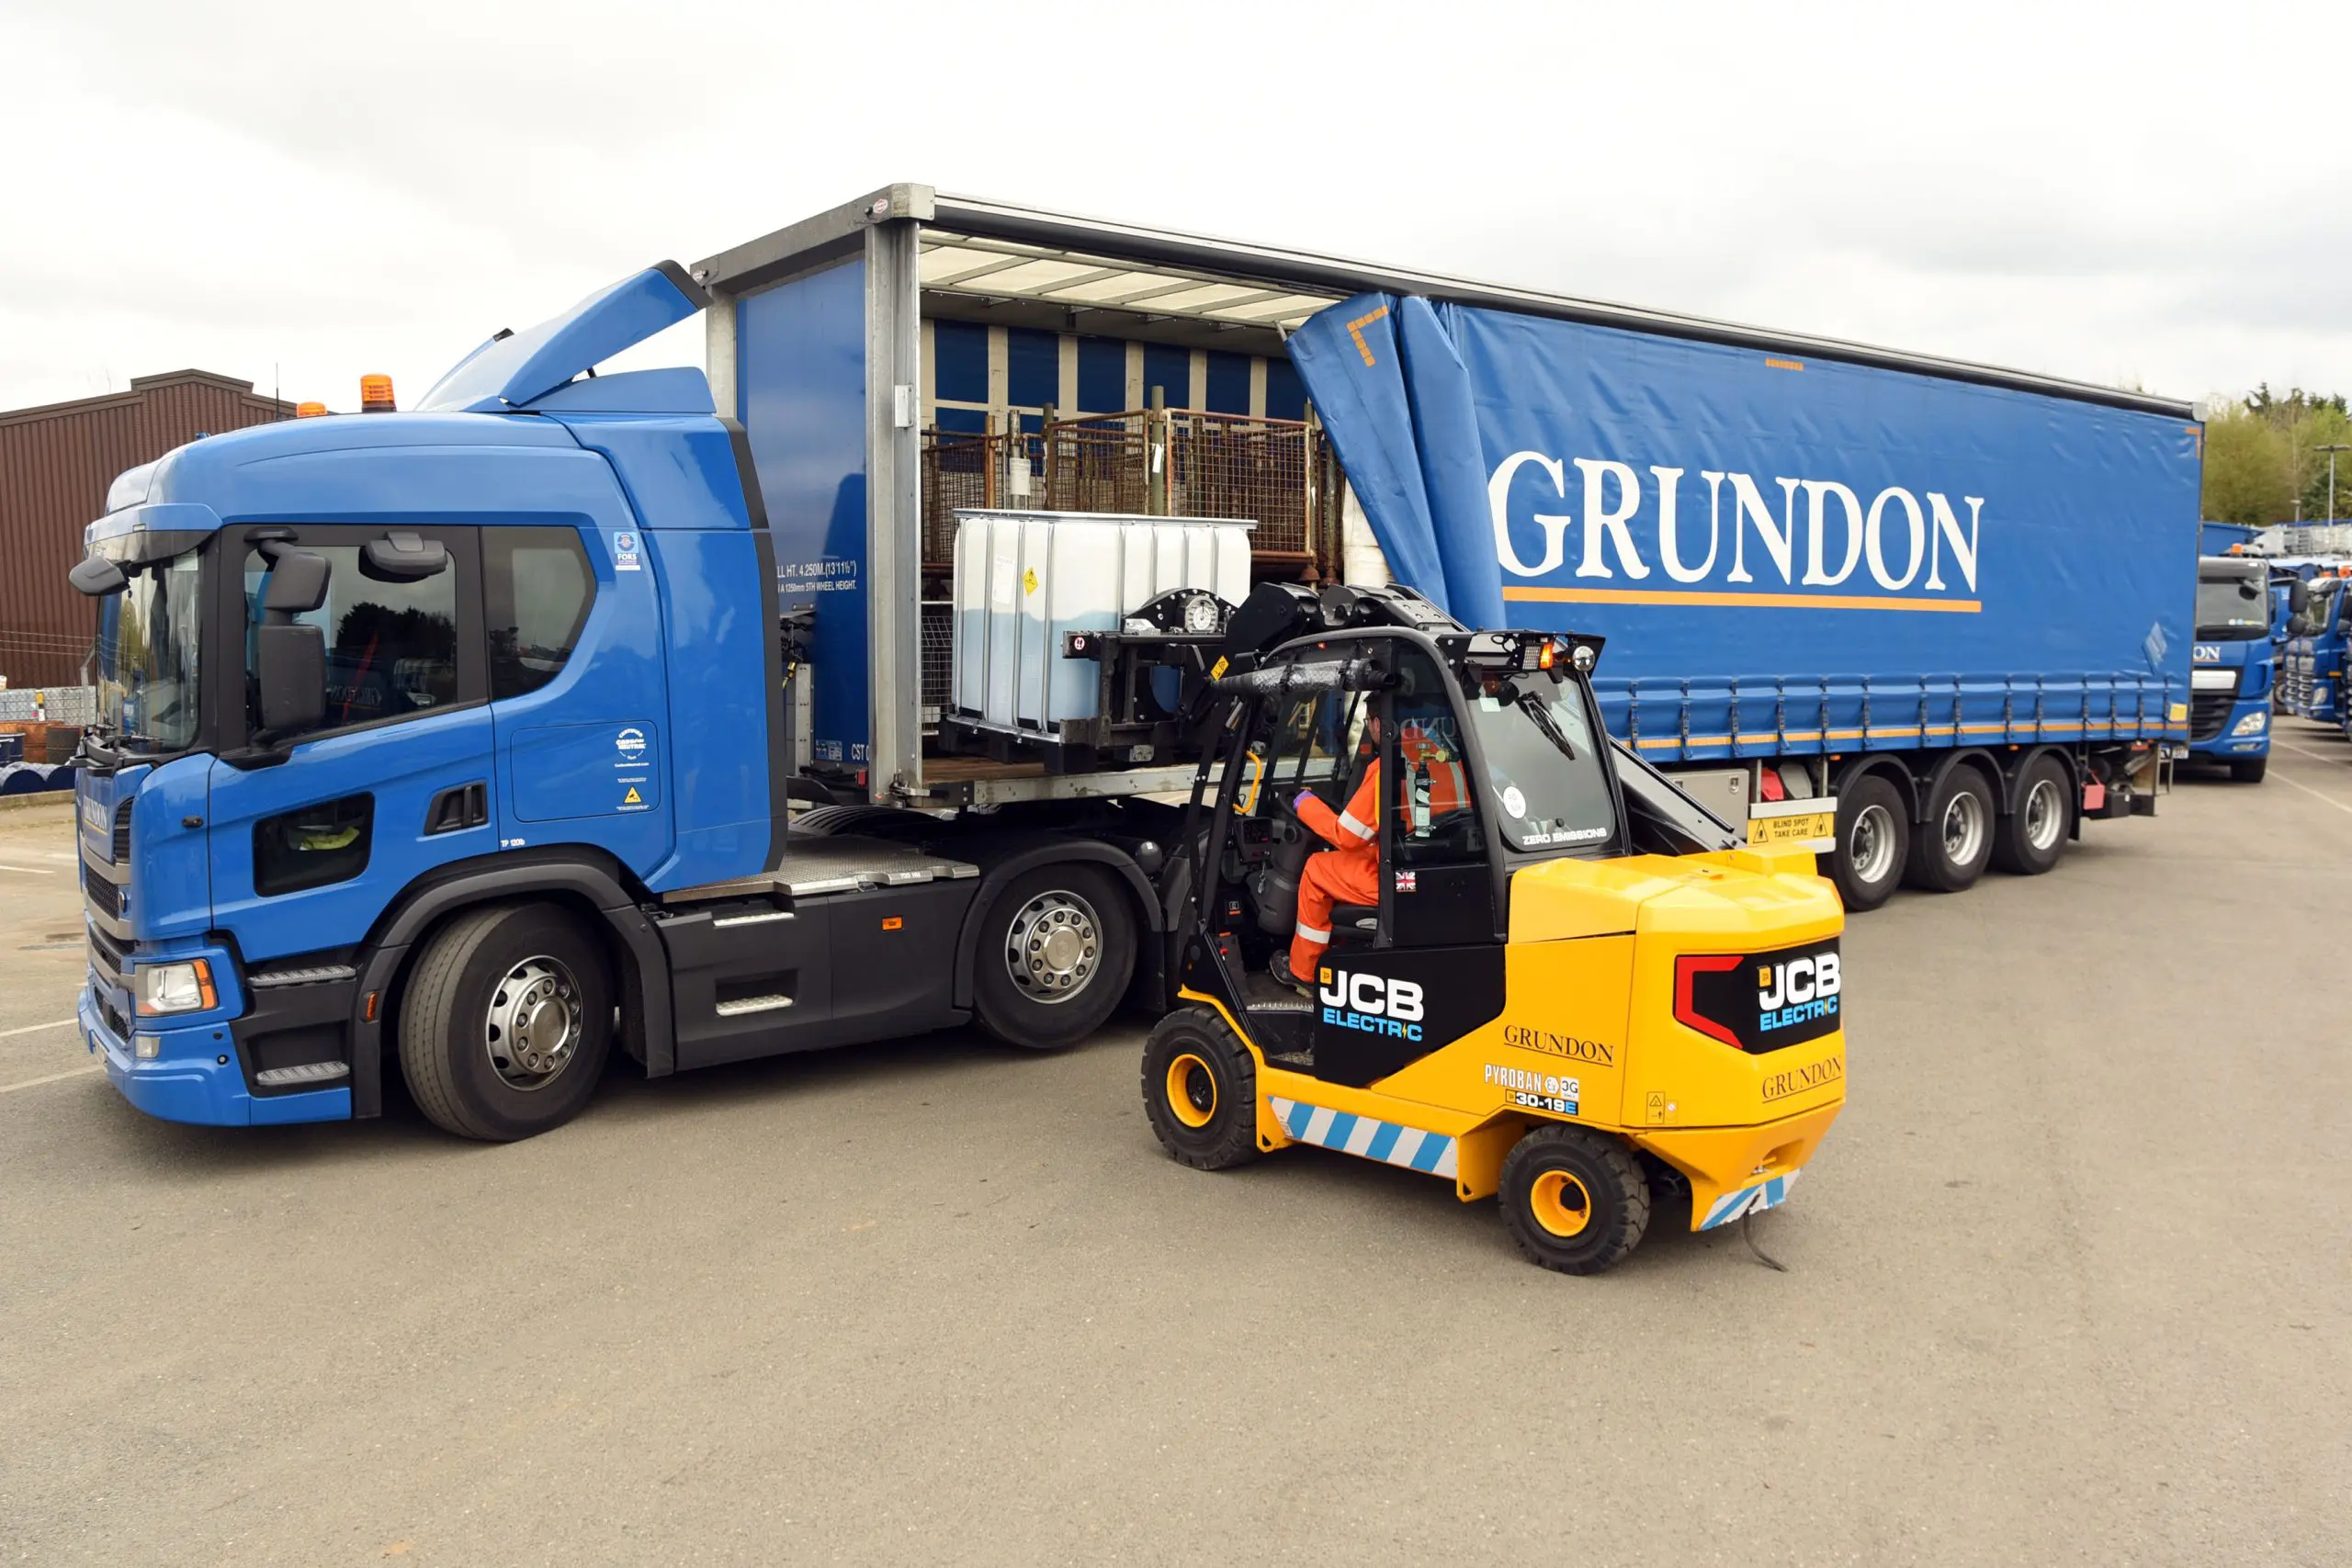 Making unloading easy: one of the new electric Teletruk forklifts in action at Grundon’s Hazardous Waste Transfer Station at Ewelme.